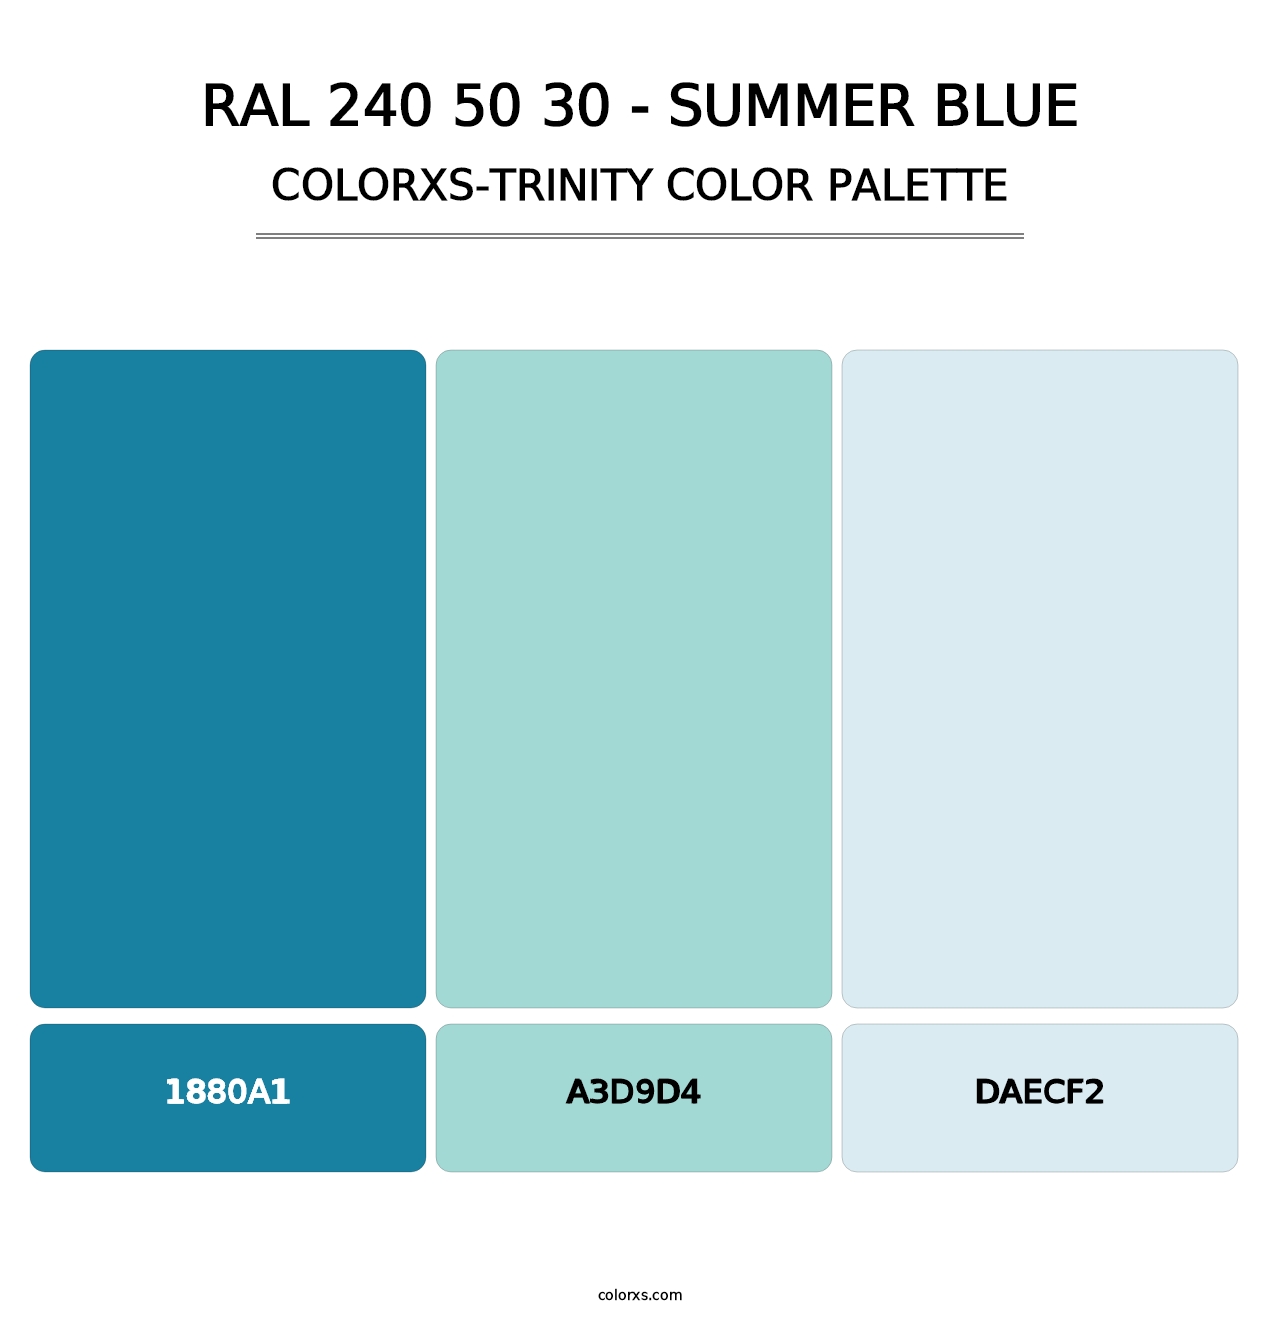 RAL 240 50 30 - Summer Blue - Colorxs Trinity Palette